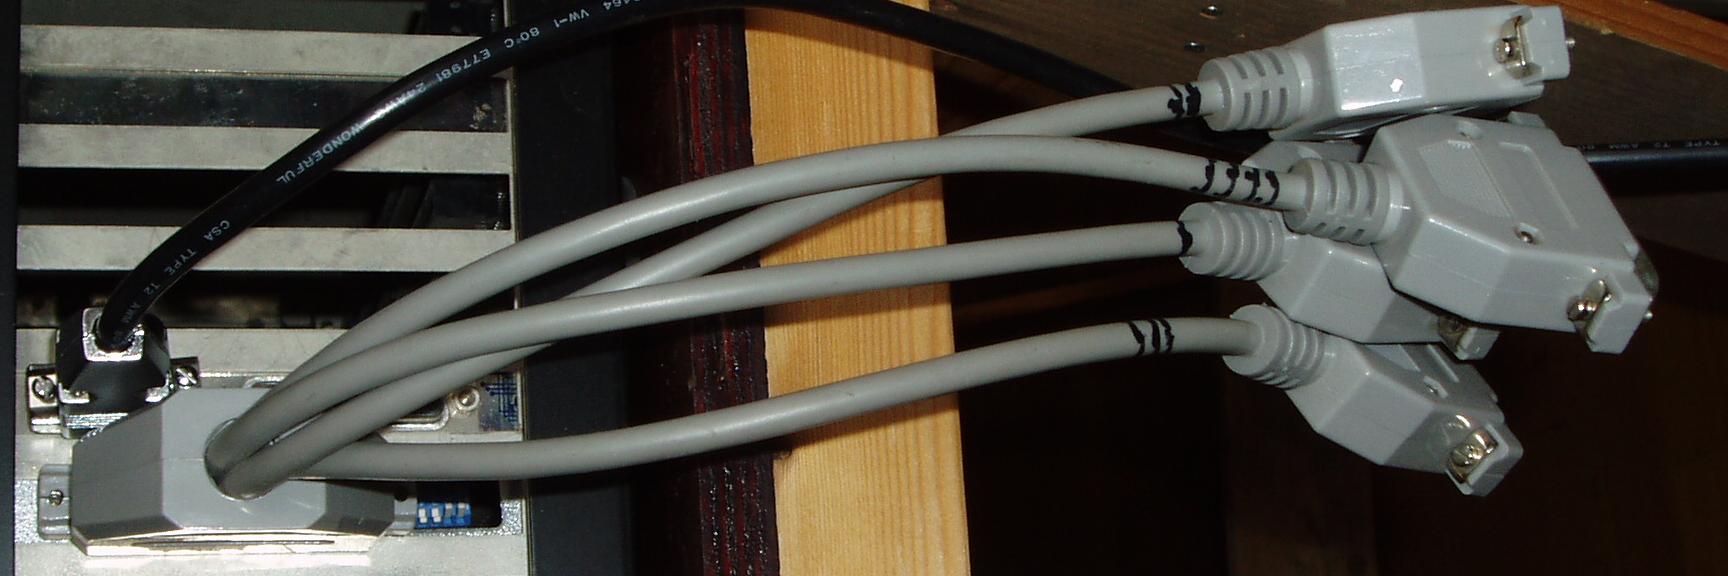 An octopus cable arrangement for 4 ports